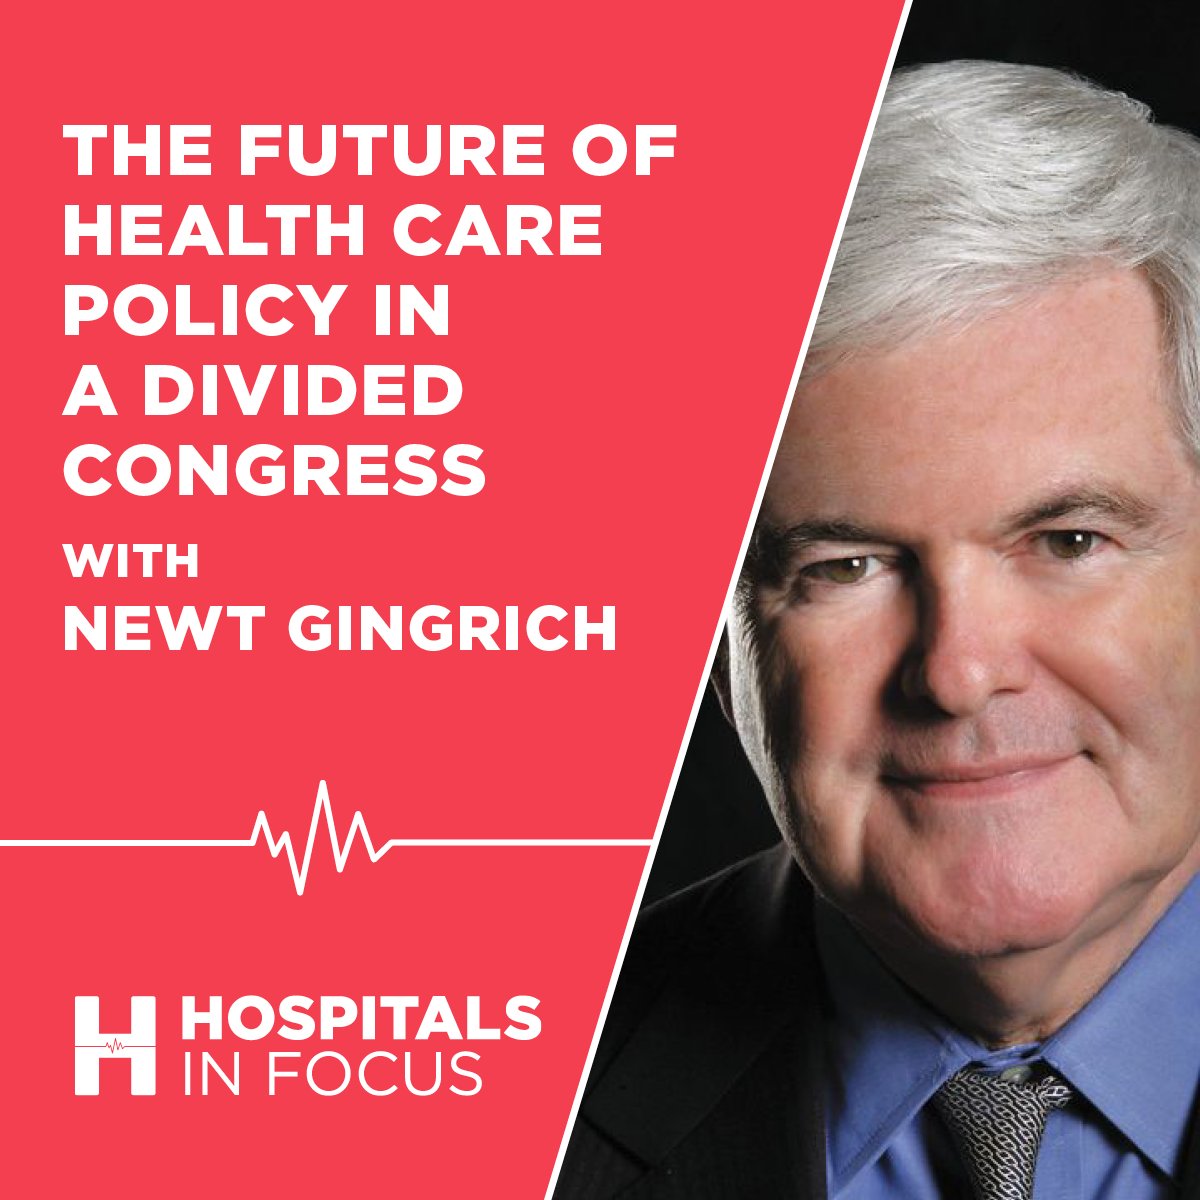 Latest #HospitalsinFocus podcast episode 'The Future of Health Care Policy in a Divided Congress with @NewtGingrich' outlines what's at stake for health policy in 118th Congress.

Other topics discussed: preventative care, health innovation. Great insight. bit.ly/3JxTPRb